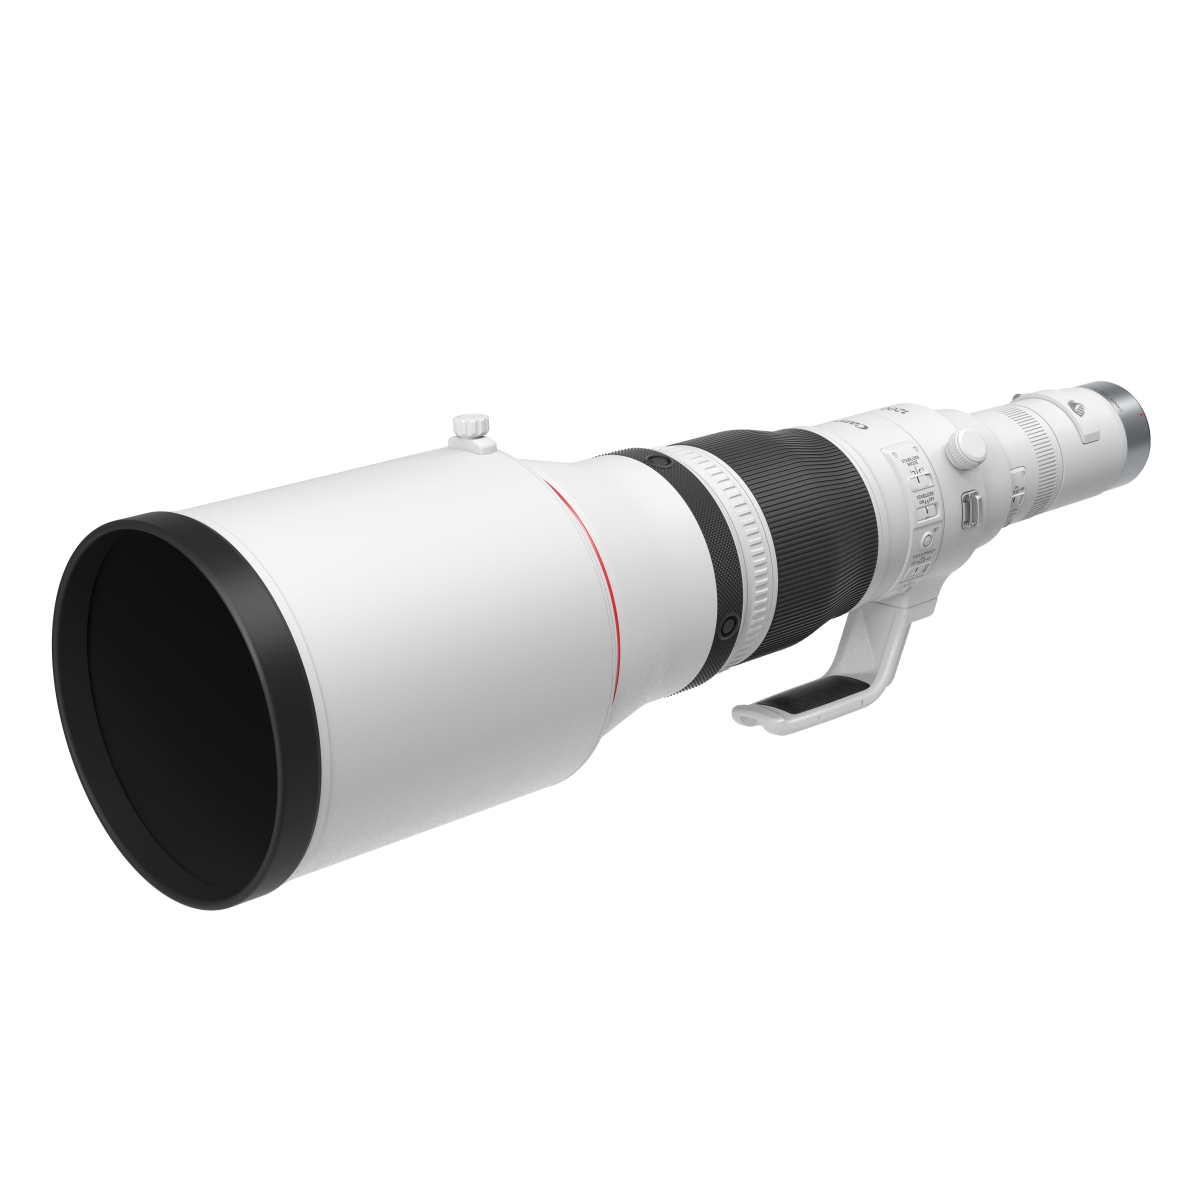 Canon 1200 mm 1:8 RF L IS USM